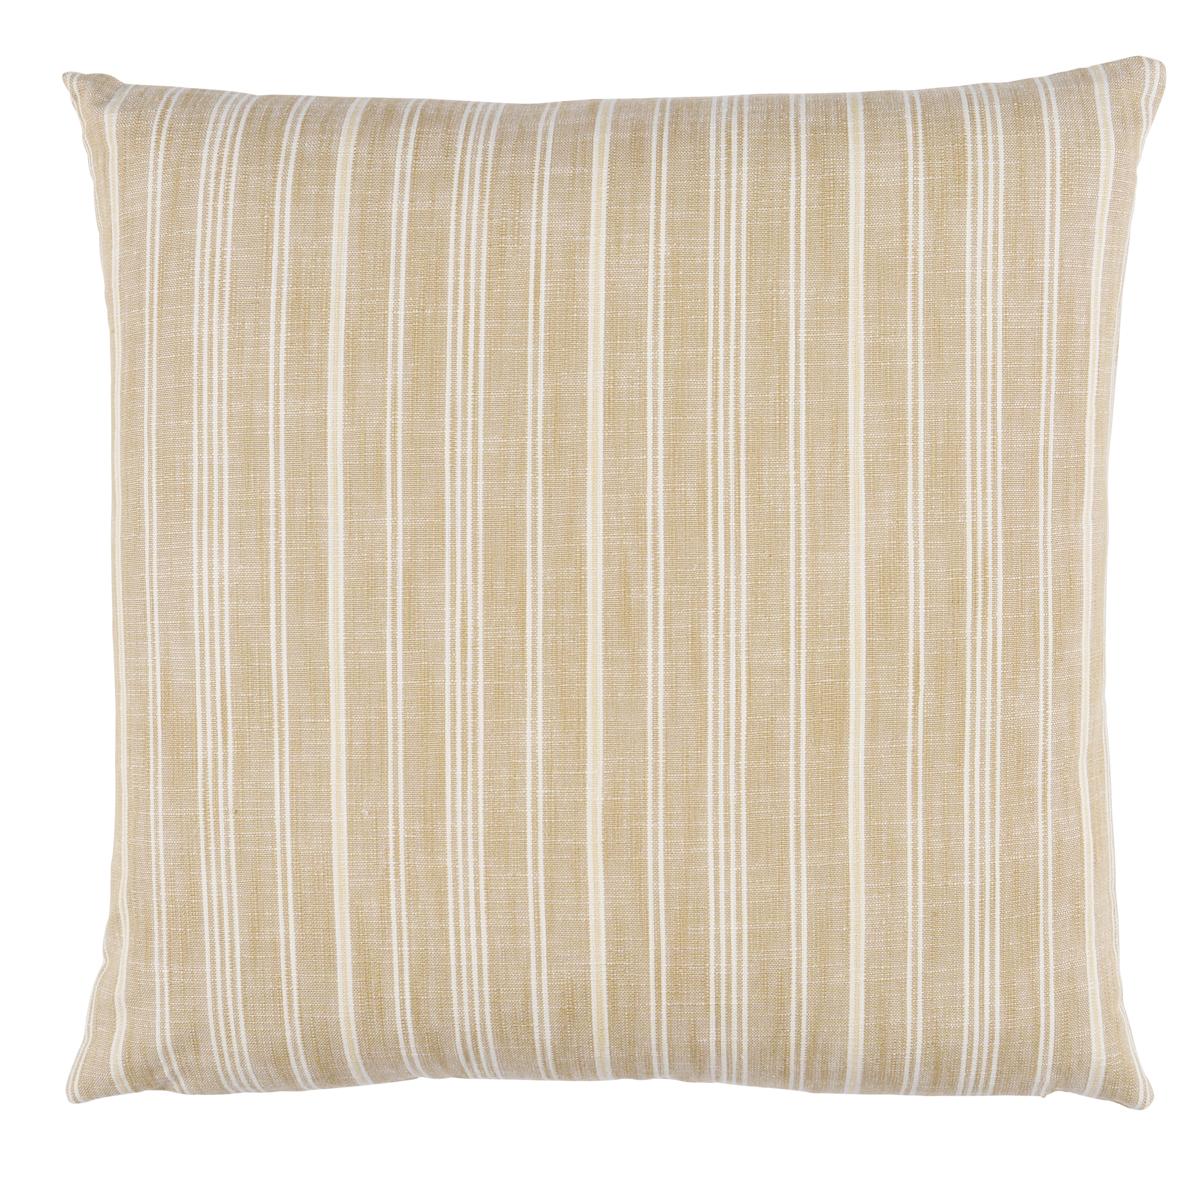 Lucy Stripe Pillow in Neutral 22 x 22" For Sale